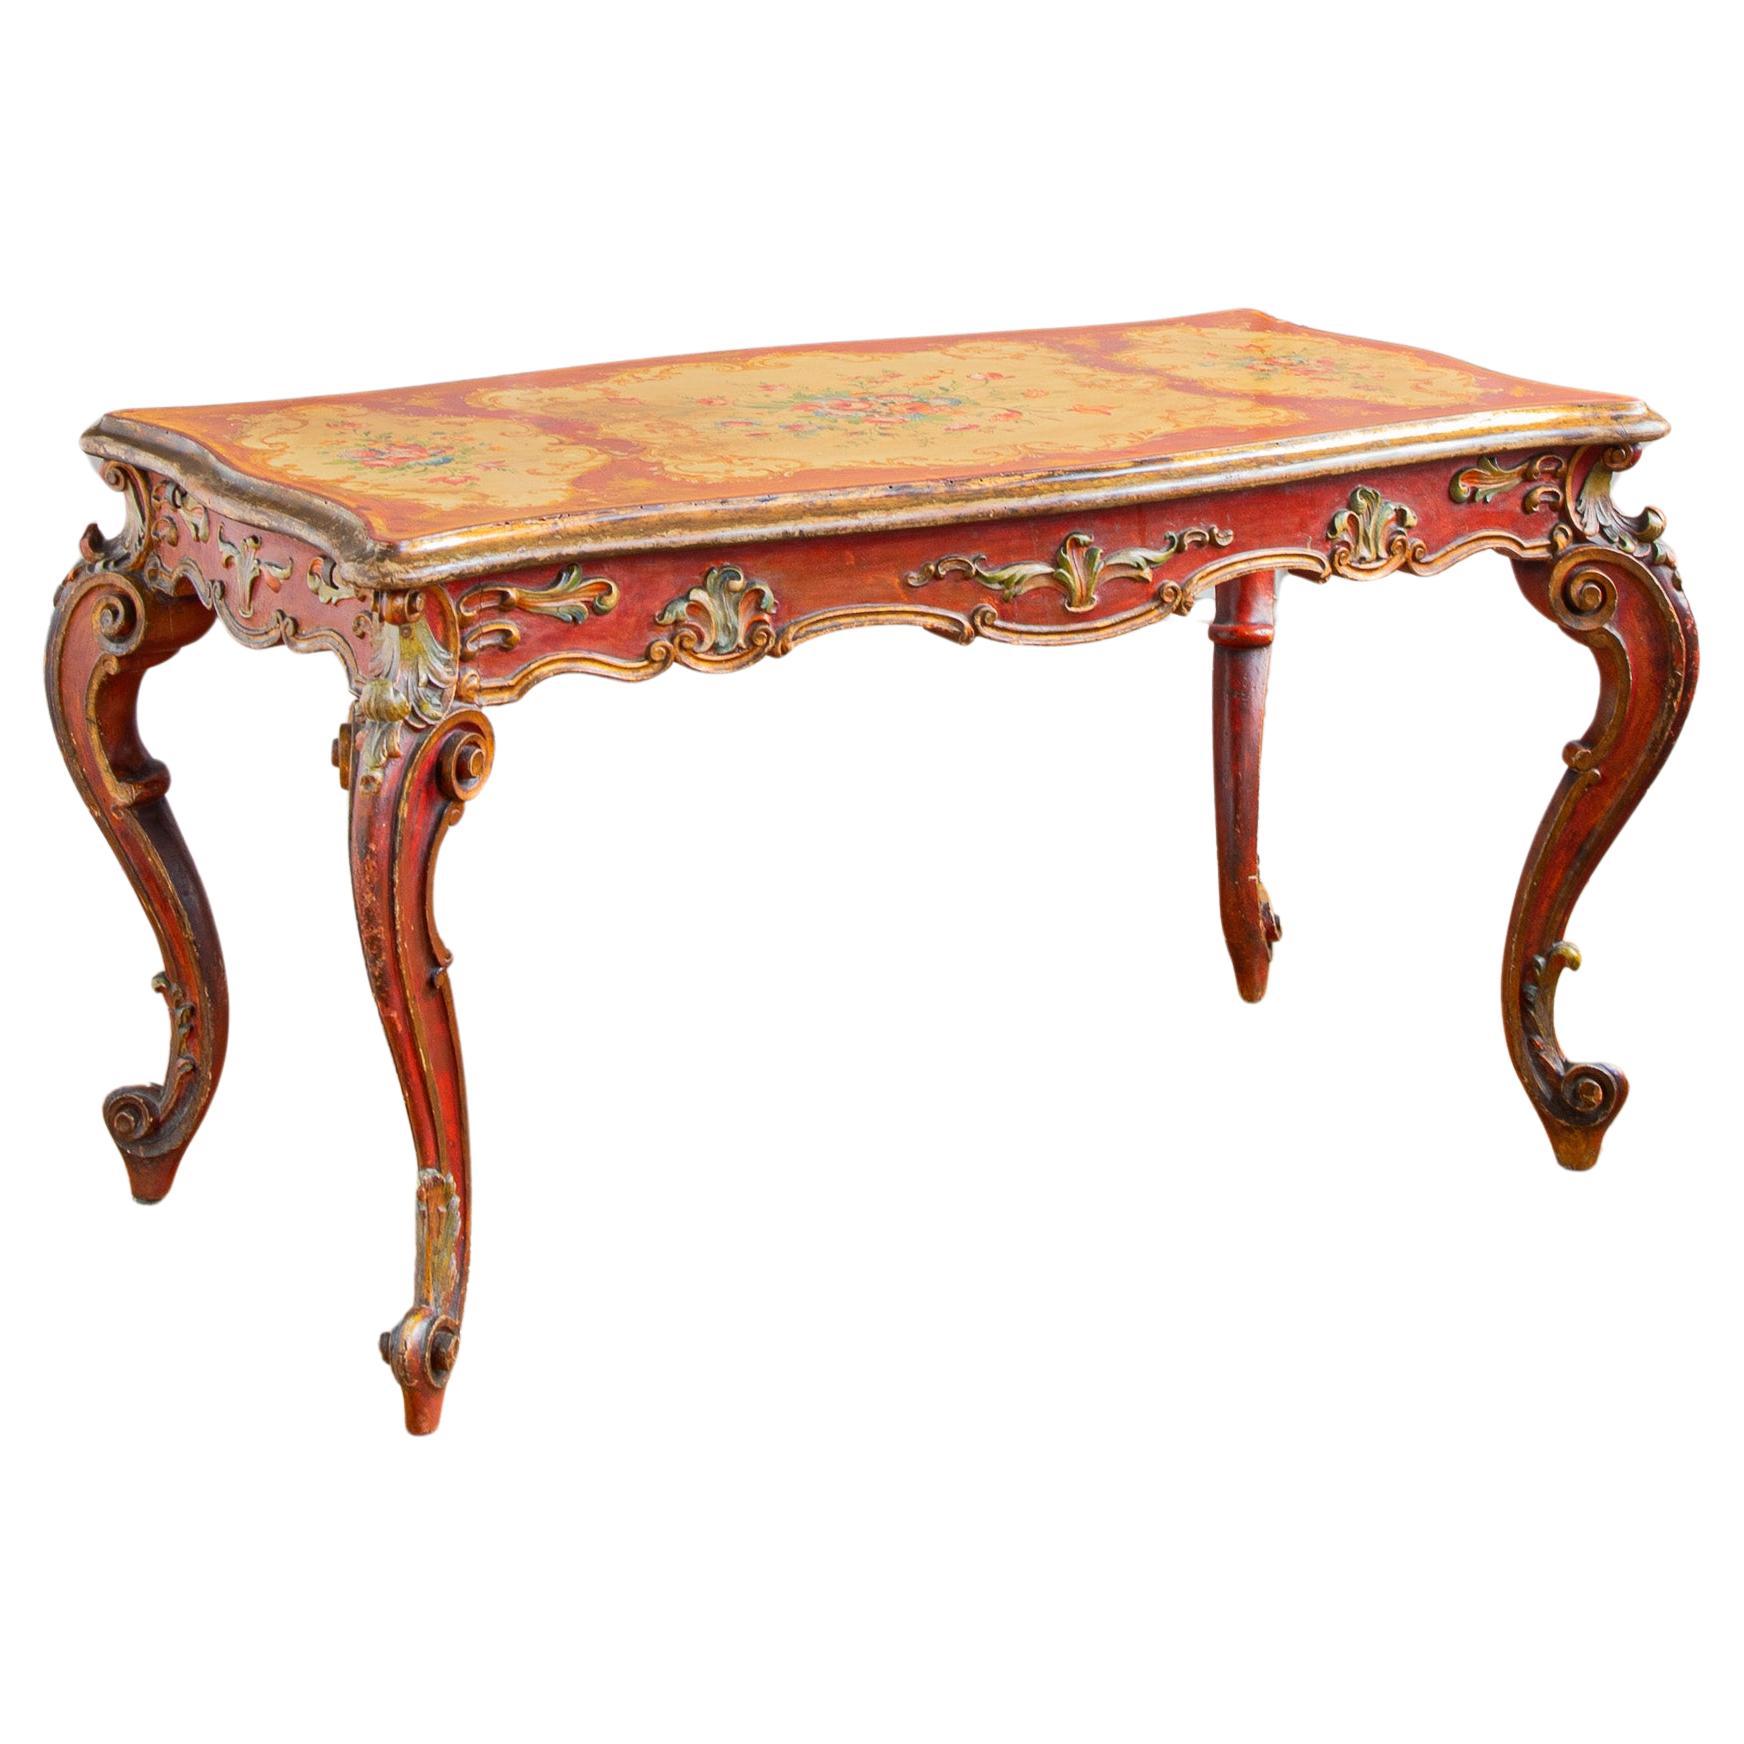  19th Century Italian Rococo Table Painted In The Venetian Style